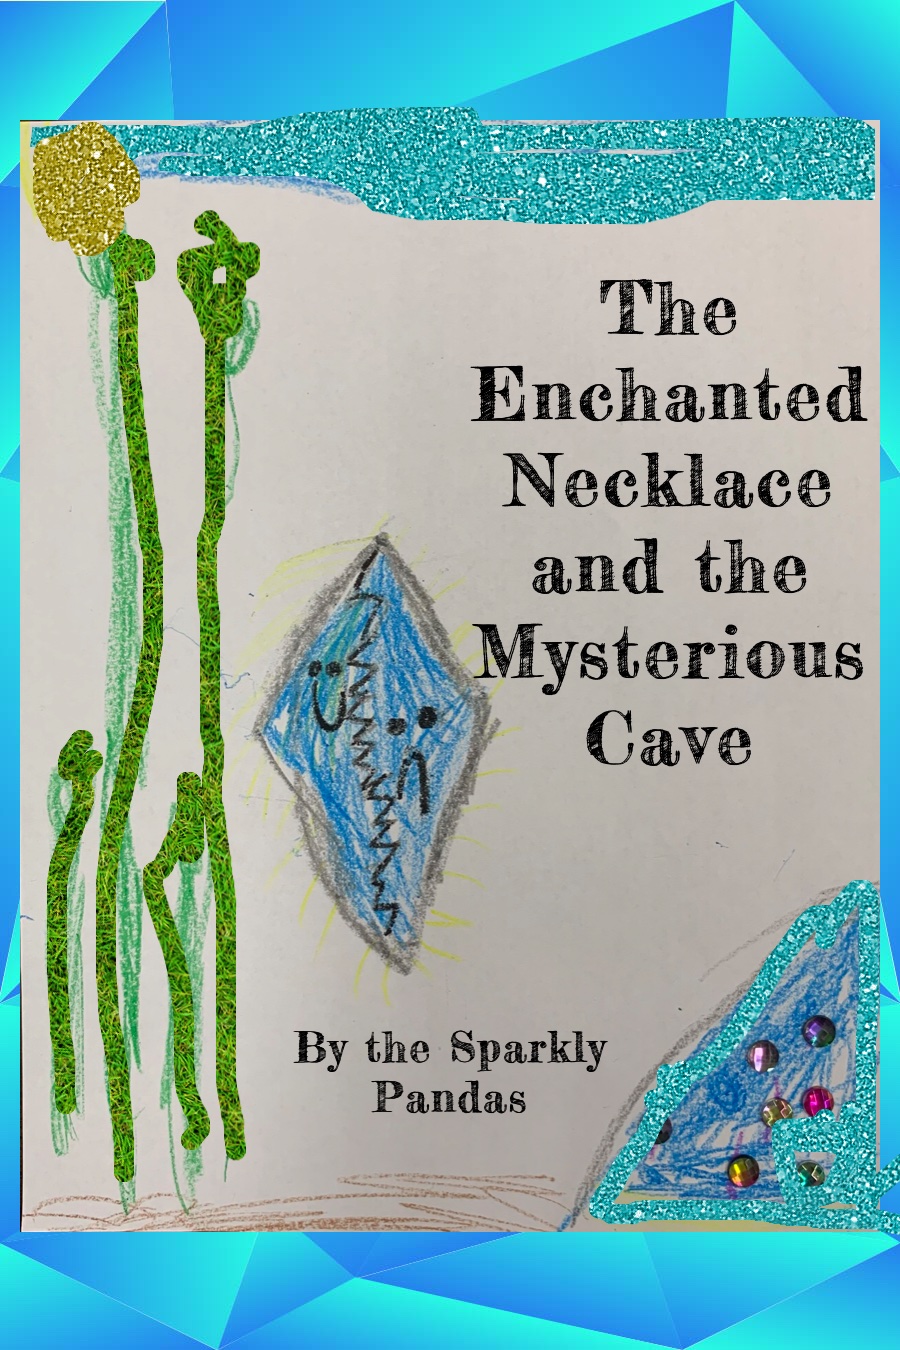 ePub Full Page Friendly Version – The Enchanted Necklace and the Mysterious Cave by SF Glen Park – July 24 – 1st Grade